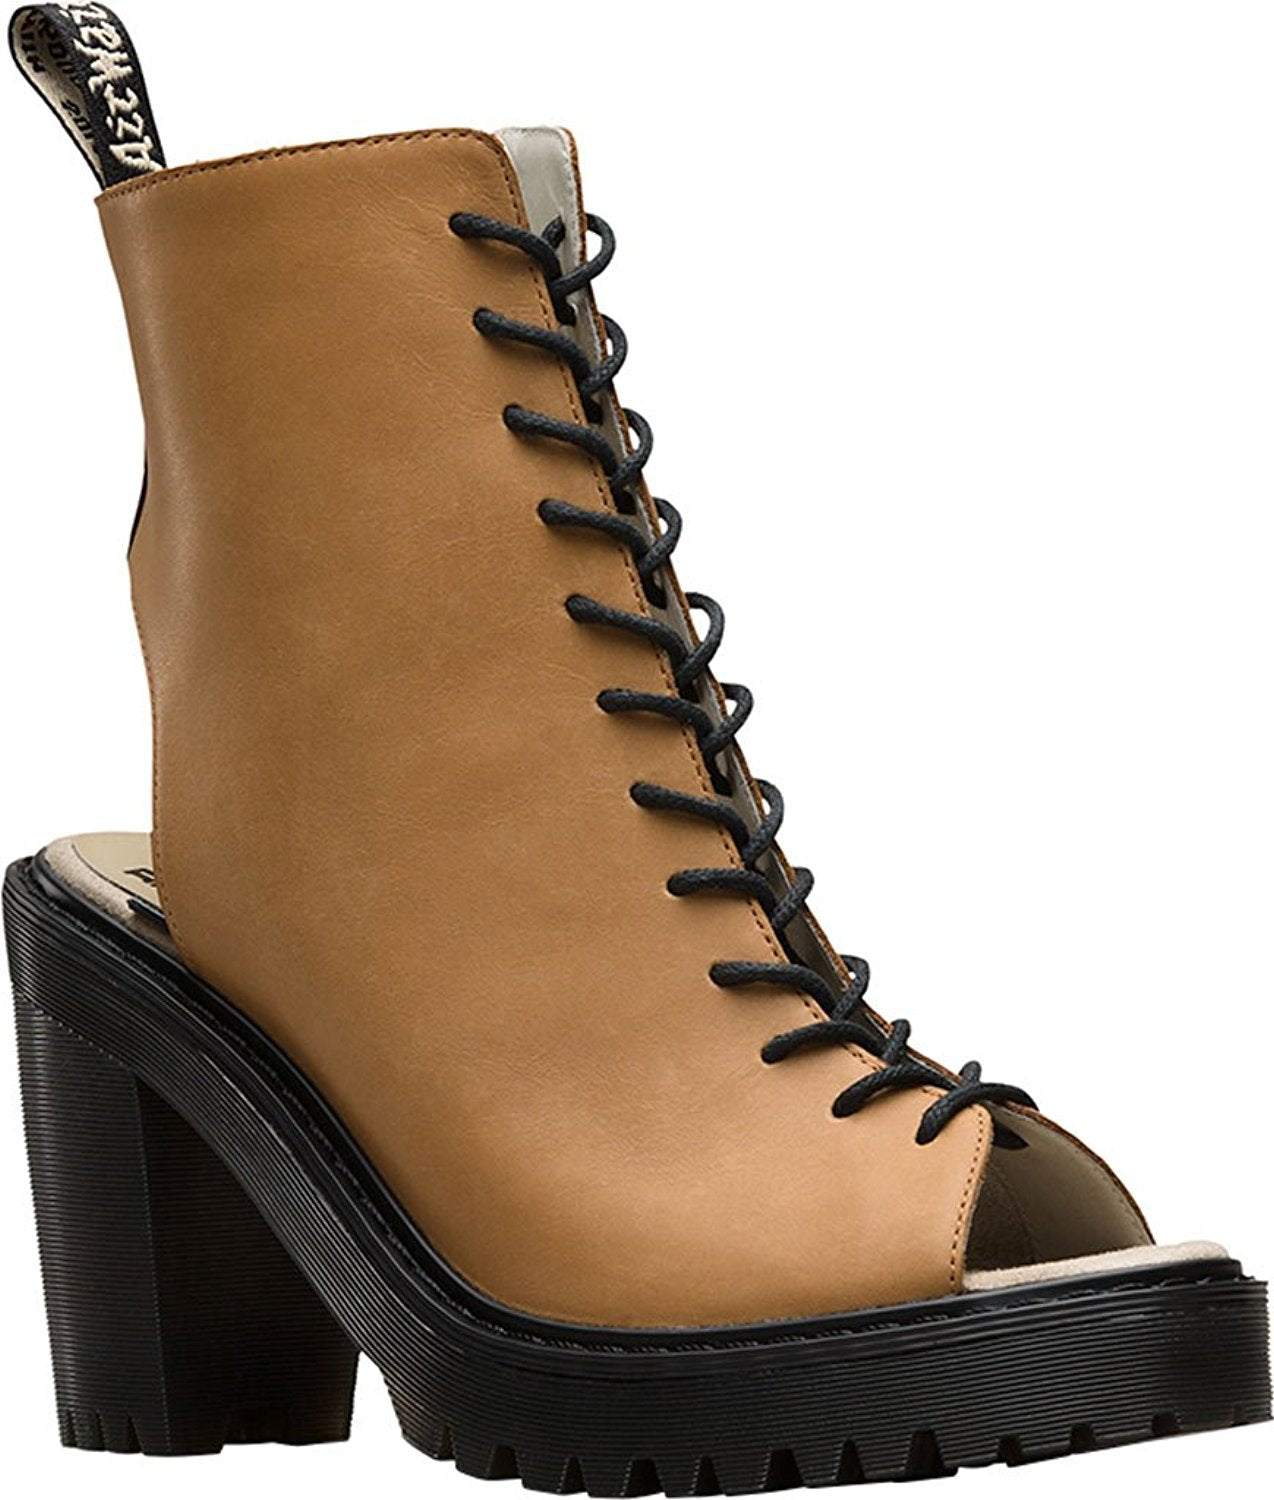 manly Automatically neutral Dr. Martens Women's Carmelita Open Heel Lace Up Boots – Pit-a-Pats.com